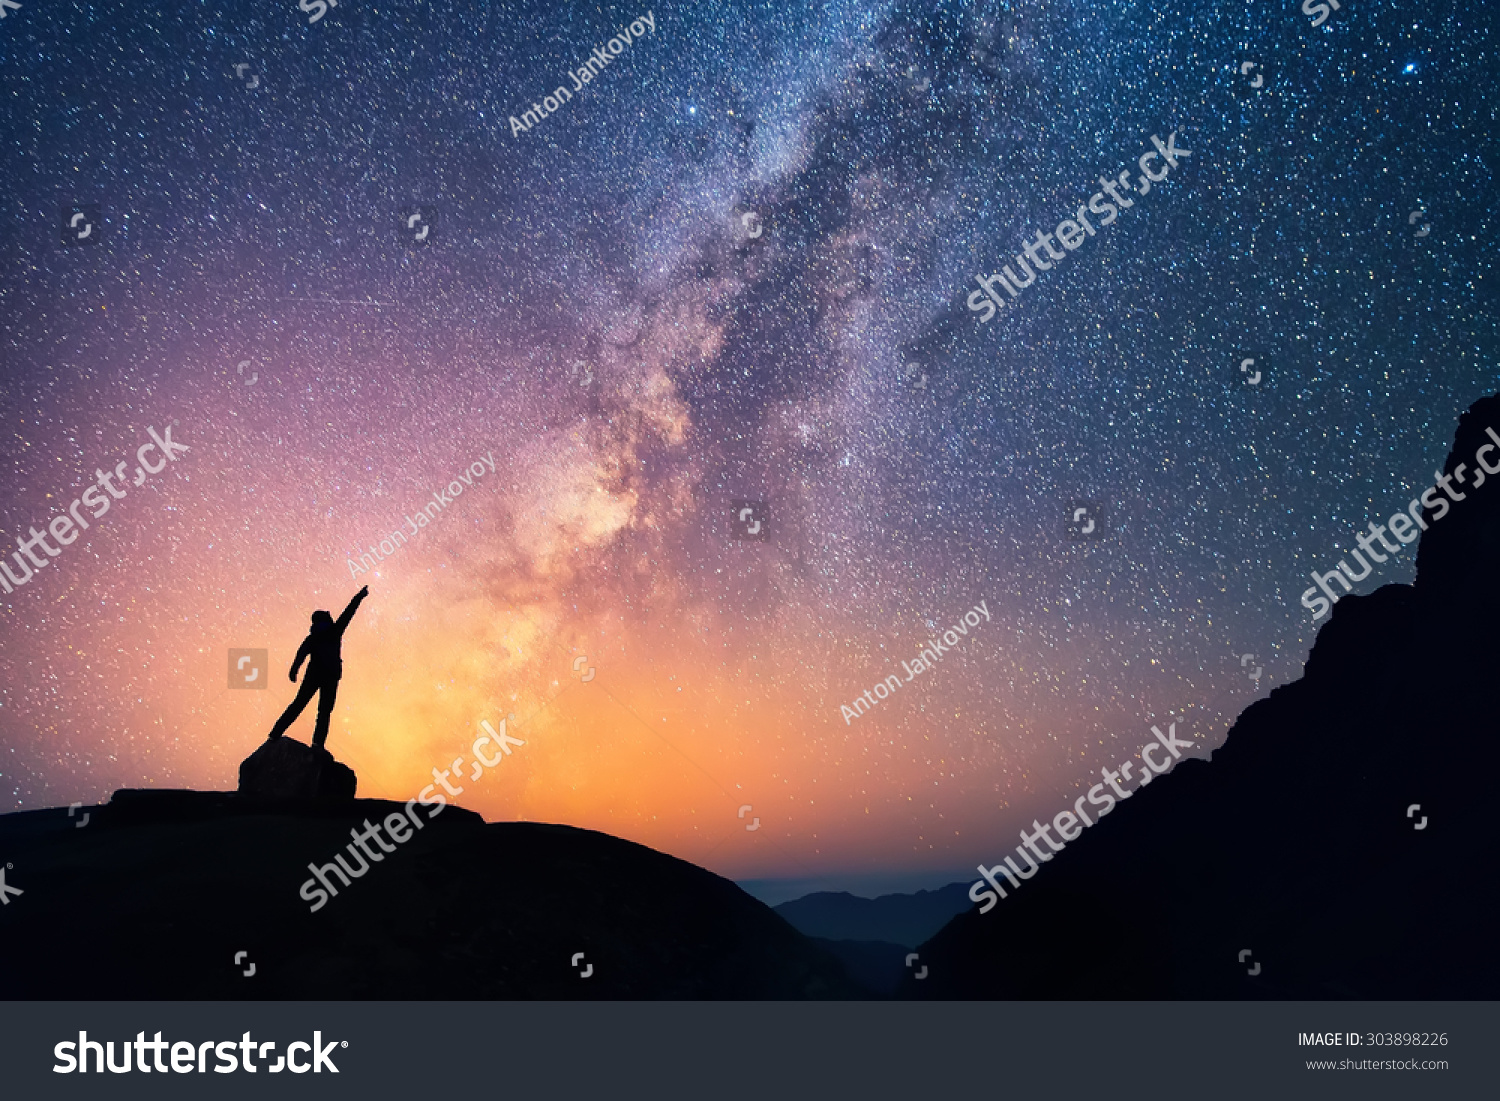 Star-catcher. A person is standing next to the Milky Way galaxy pointing on a bright star. #303898226